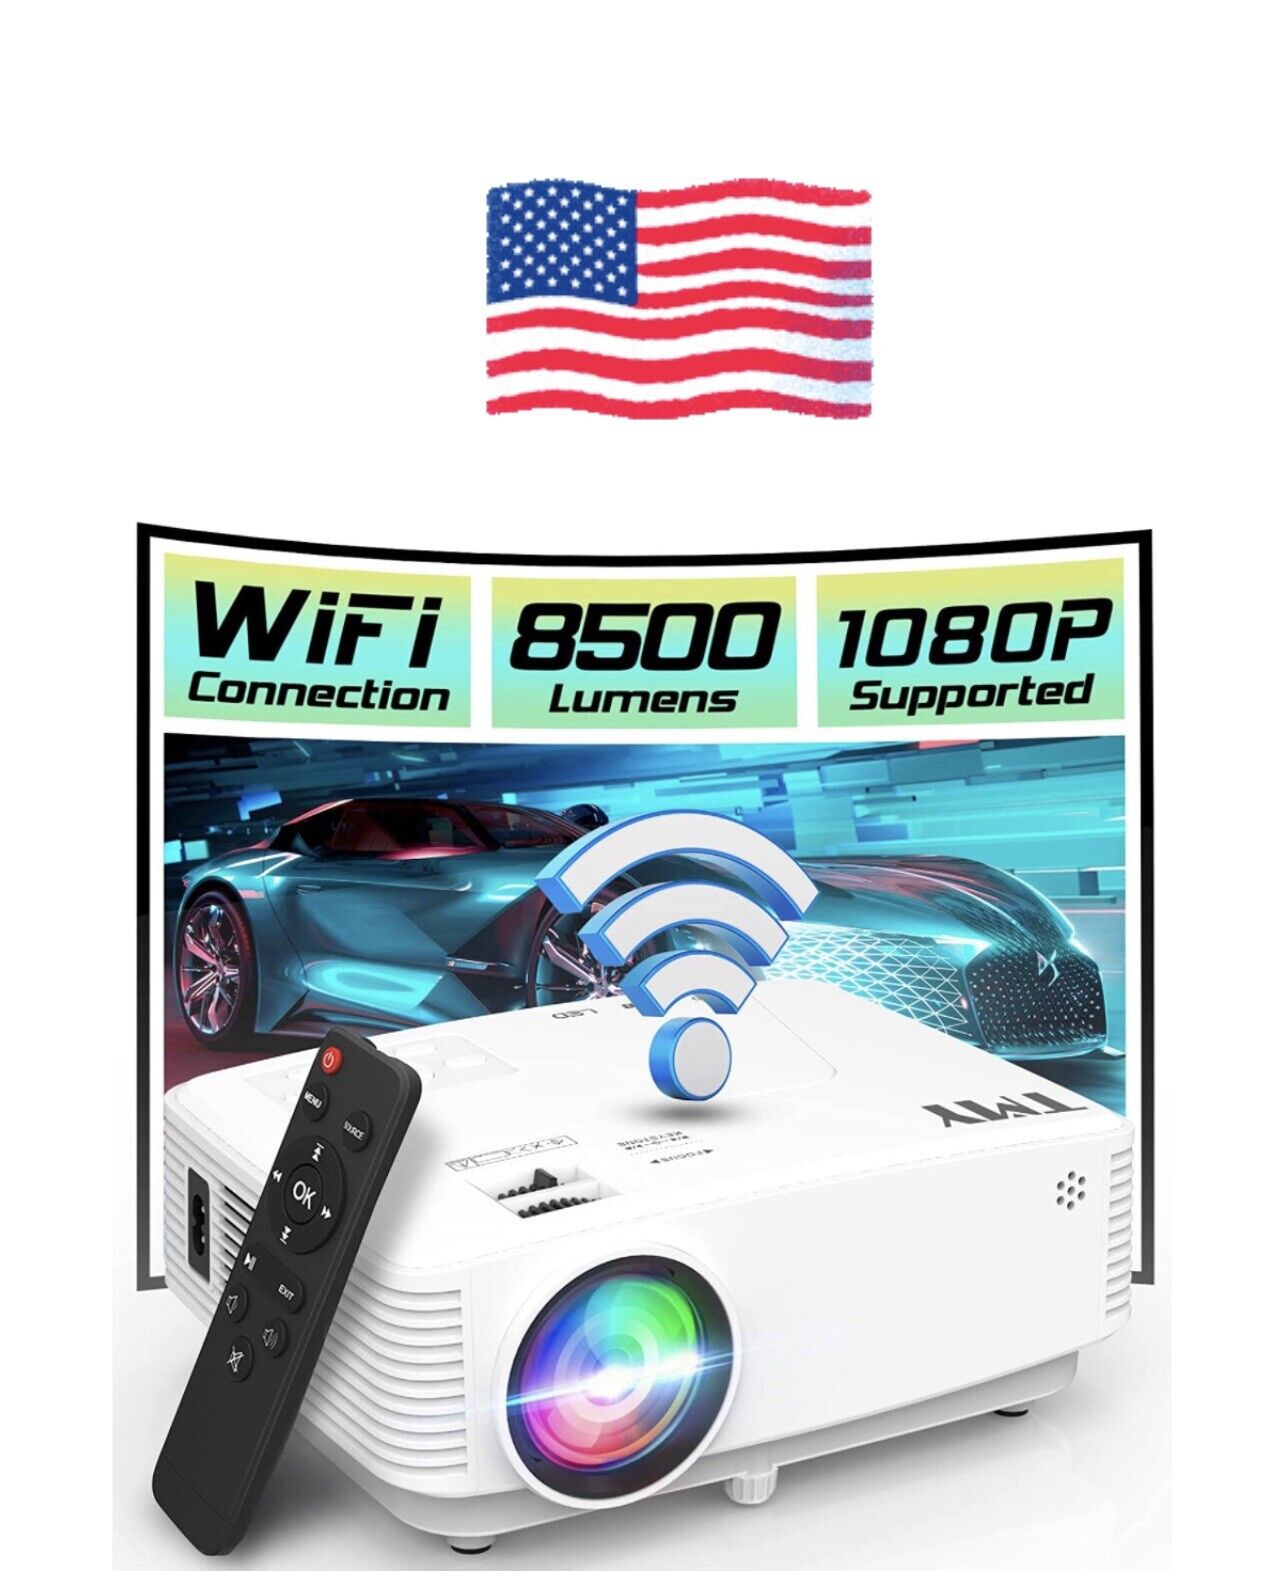 TMY Mini WiFi Projector 8500 Lumen 1080P FHD Supported Portable Outdoor Movie...